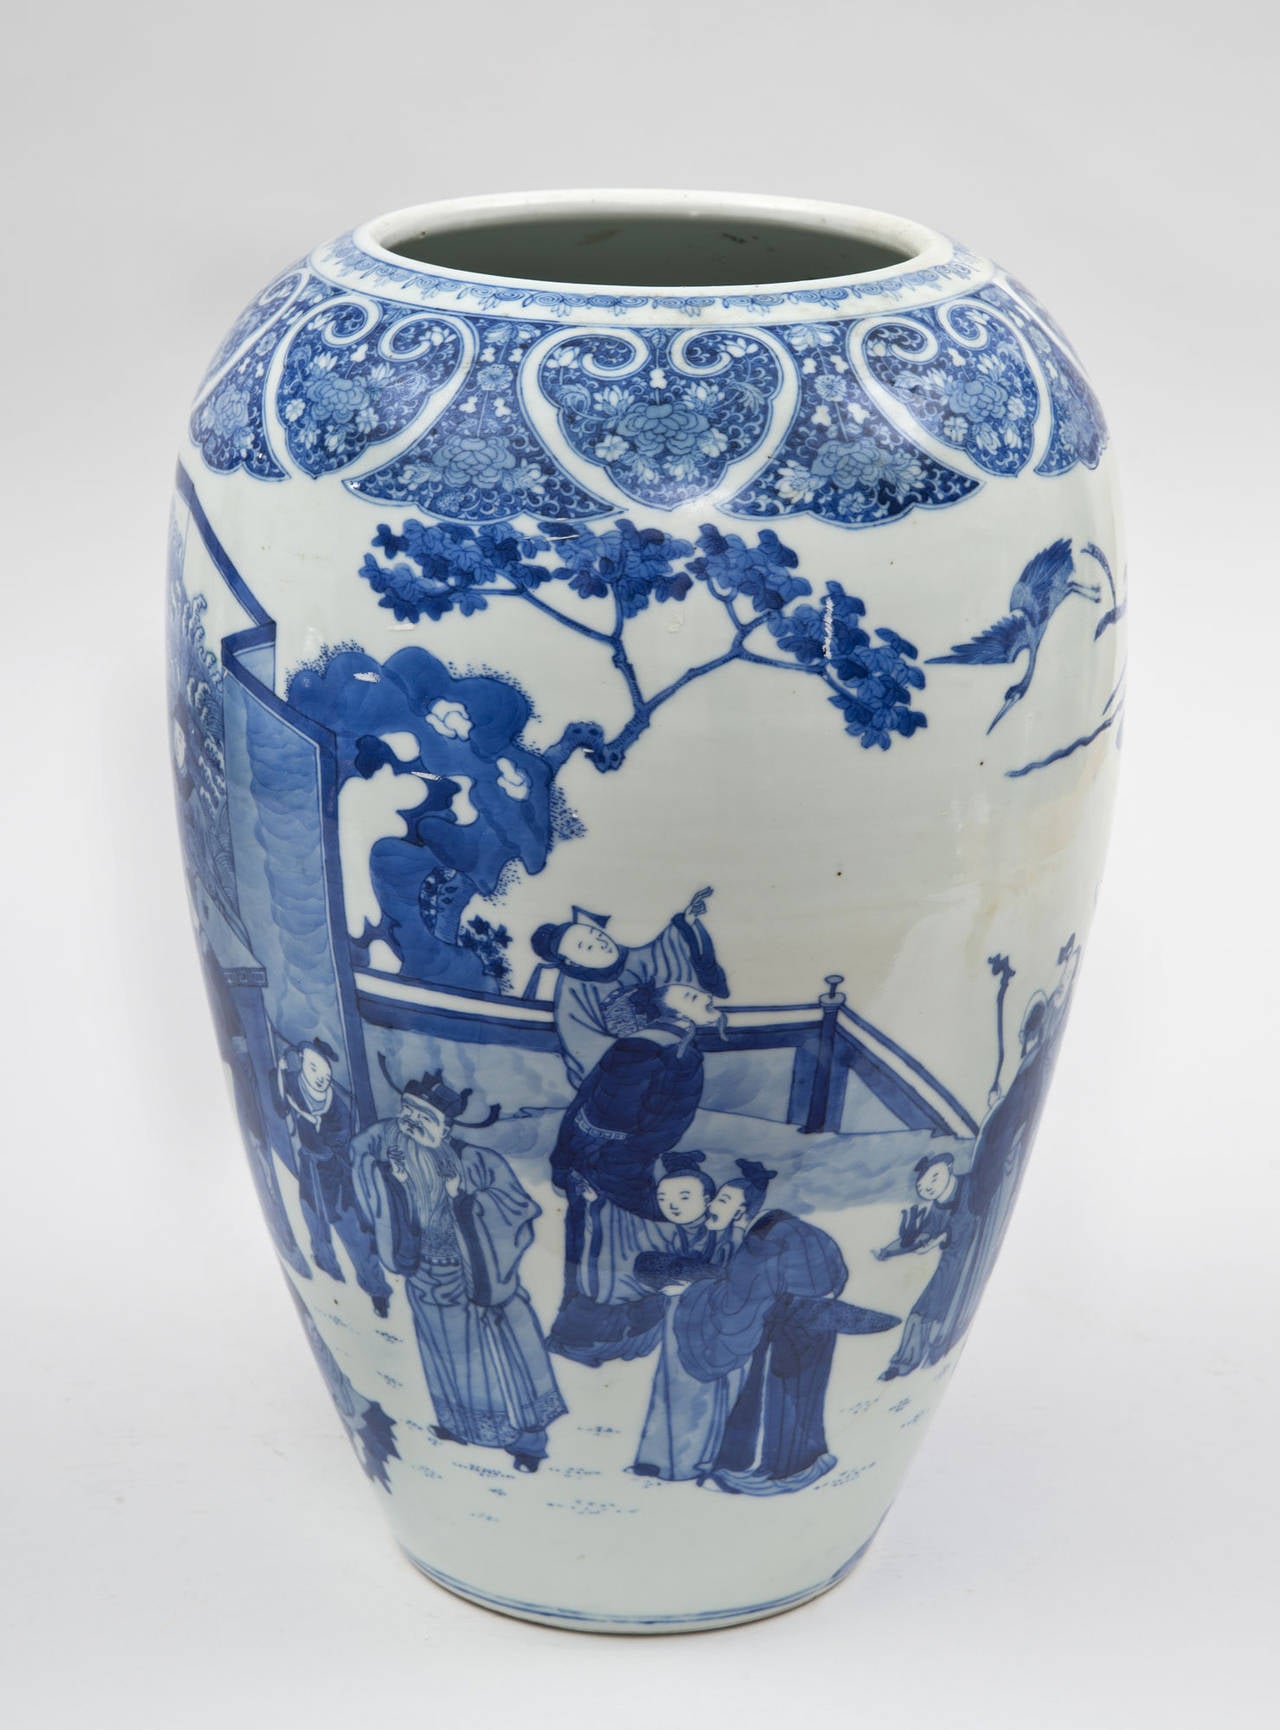 Blue and white porcelain ovoid shaped vase decorated with a continuous pattern of figures in various means of pursuit – playing games with a beautiful seven panel screen behind them, unfurling a scroll, bird watching beside a gnarled tree.